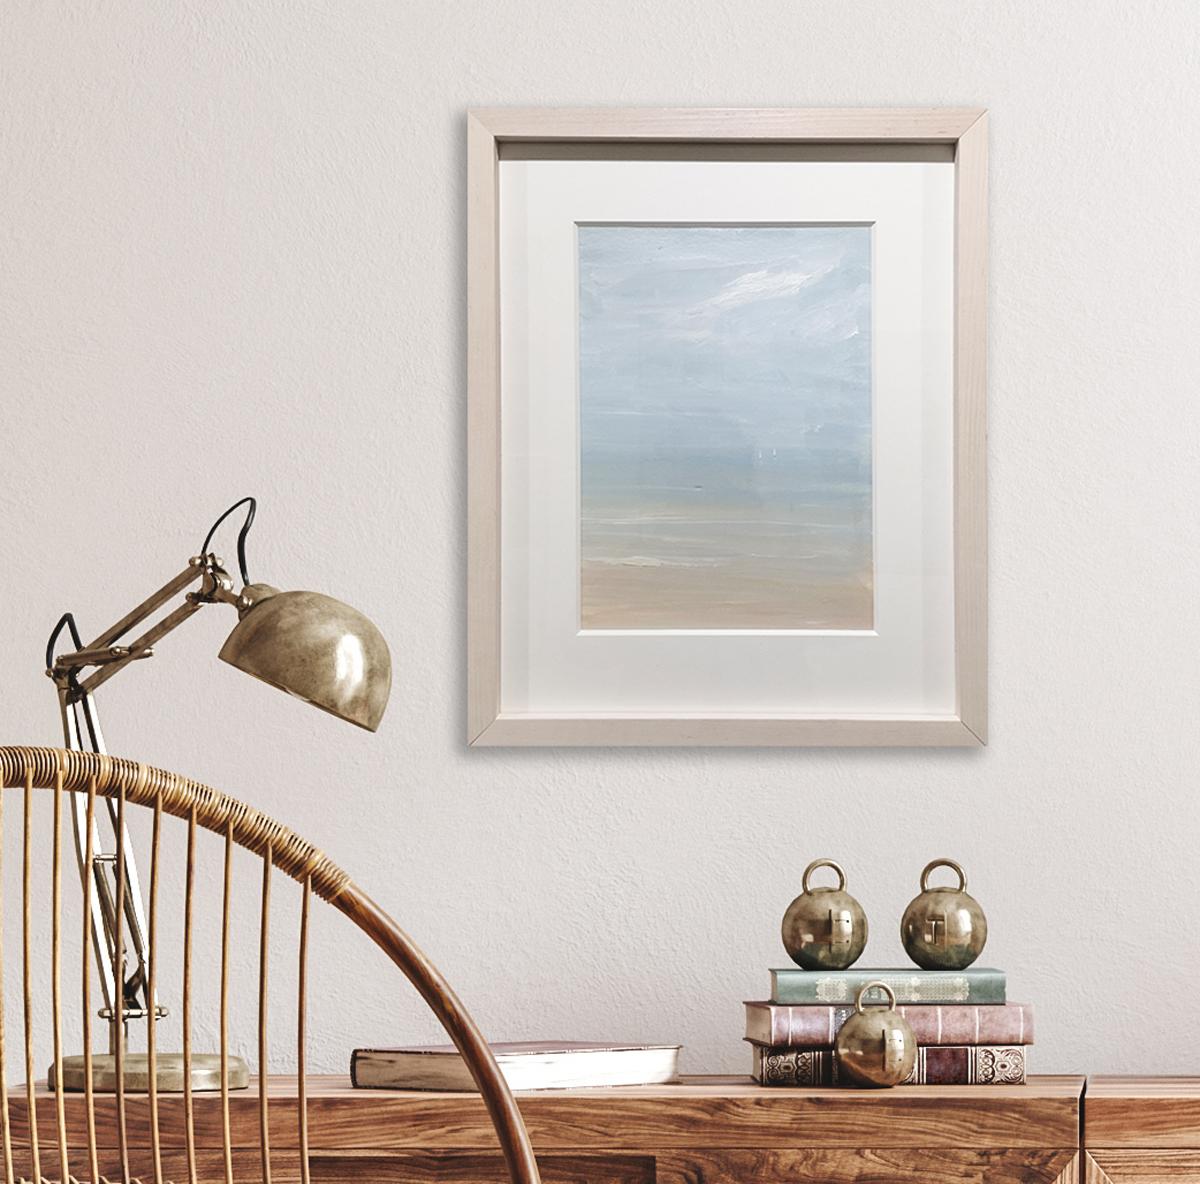 This contemporary seascape painting by S.C. Aldo is made with acrylic paint on Arches paper. It features a light, almost pastel coastal palette, and captures an abstracted view of the ocean and shoreline in the foreground, and two small white